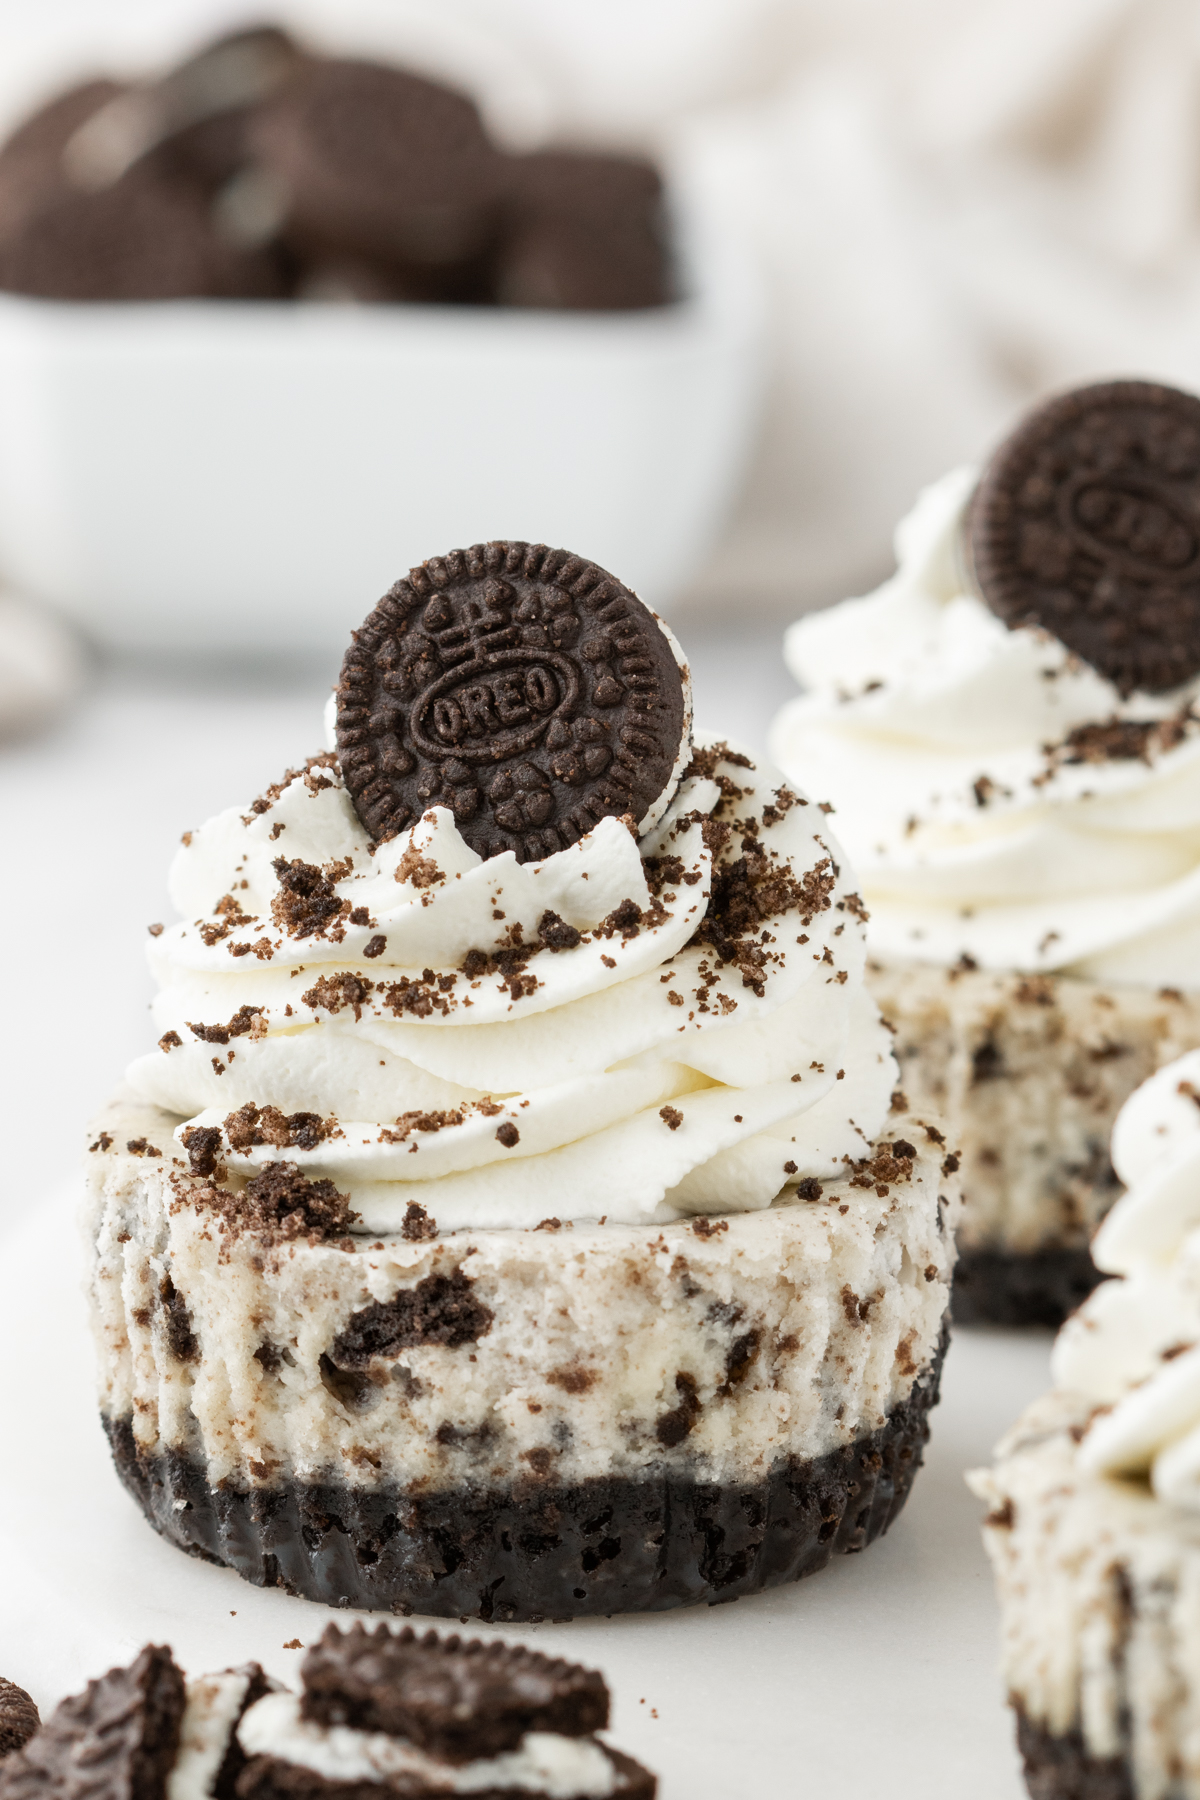 Creamy and delicious Mini Oreo Cheesecakes on an Oreo crust and topped with whipped cream and more Oreos. A must make for Oreos lovers! They are so simple and bake in a muffin pan. 